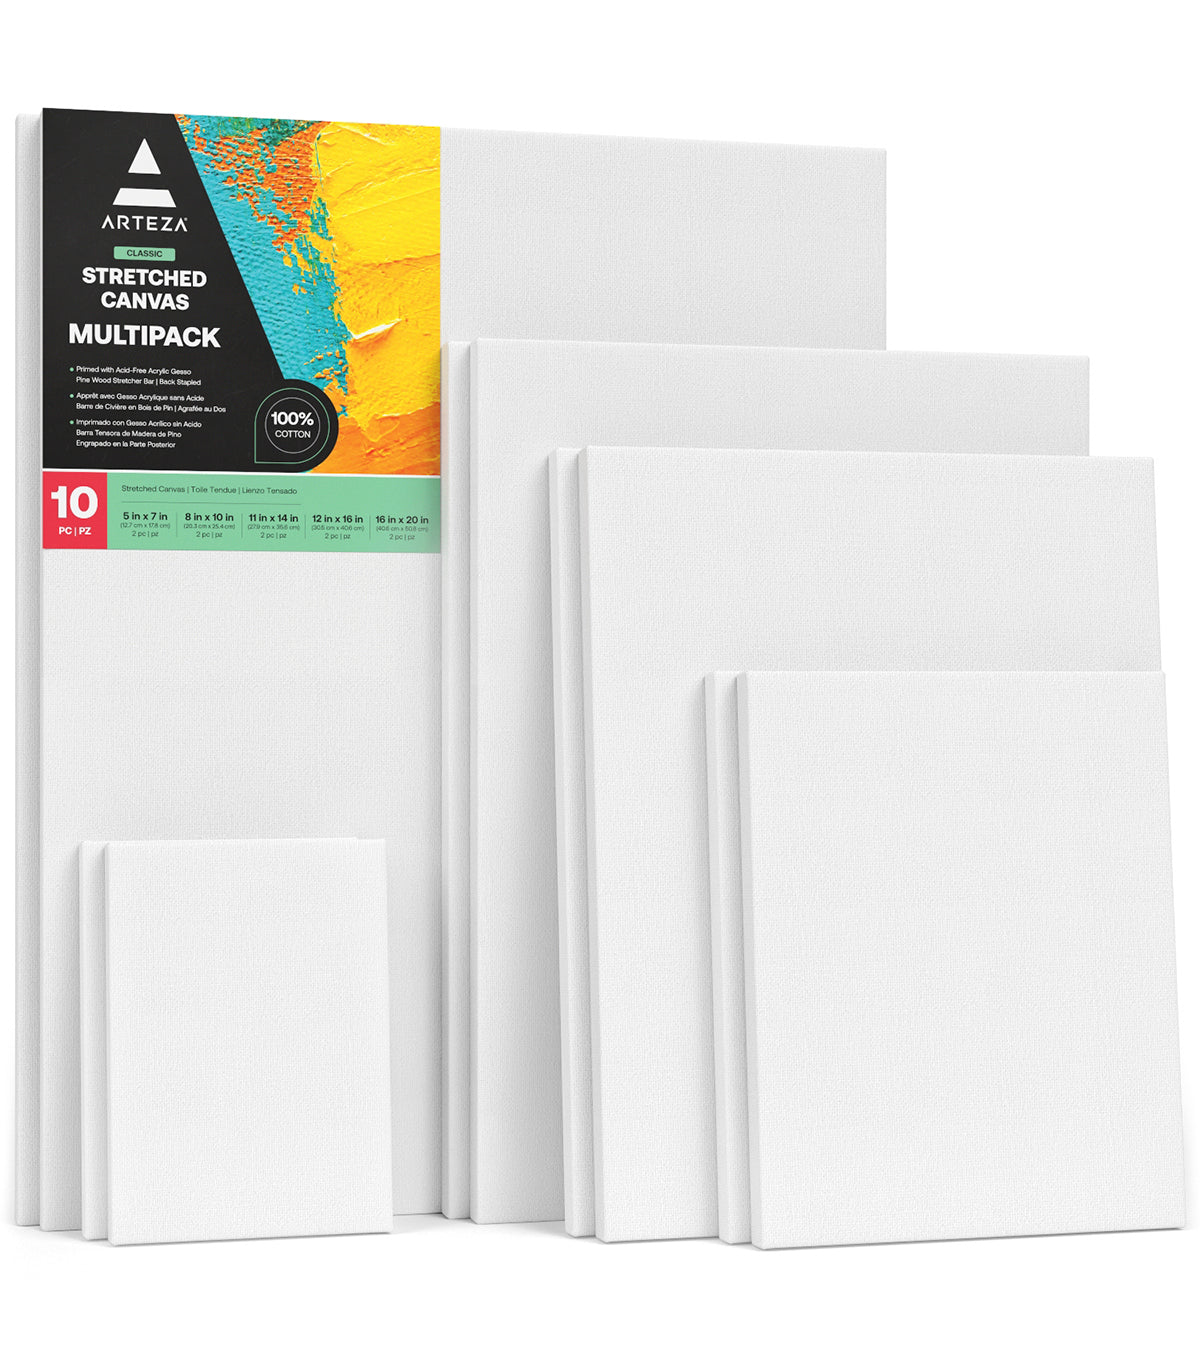 7 Sets Stretched Canvas 11x14 100% Cotton Artist Canvas Boards for  Painting